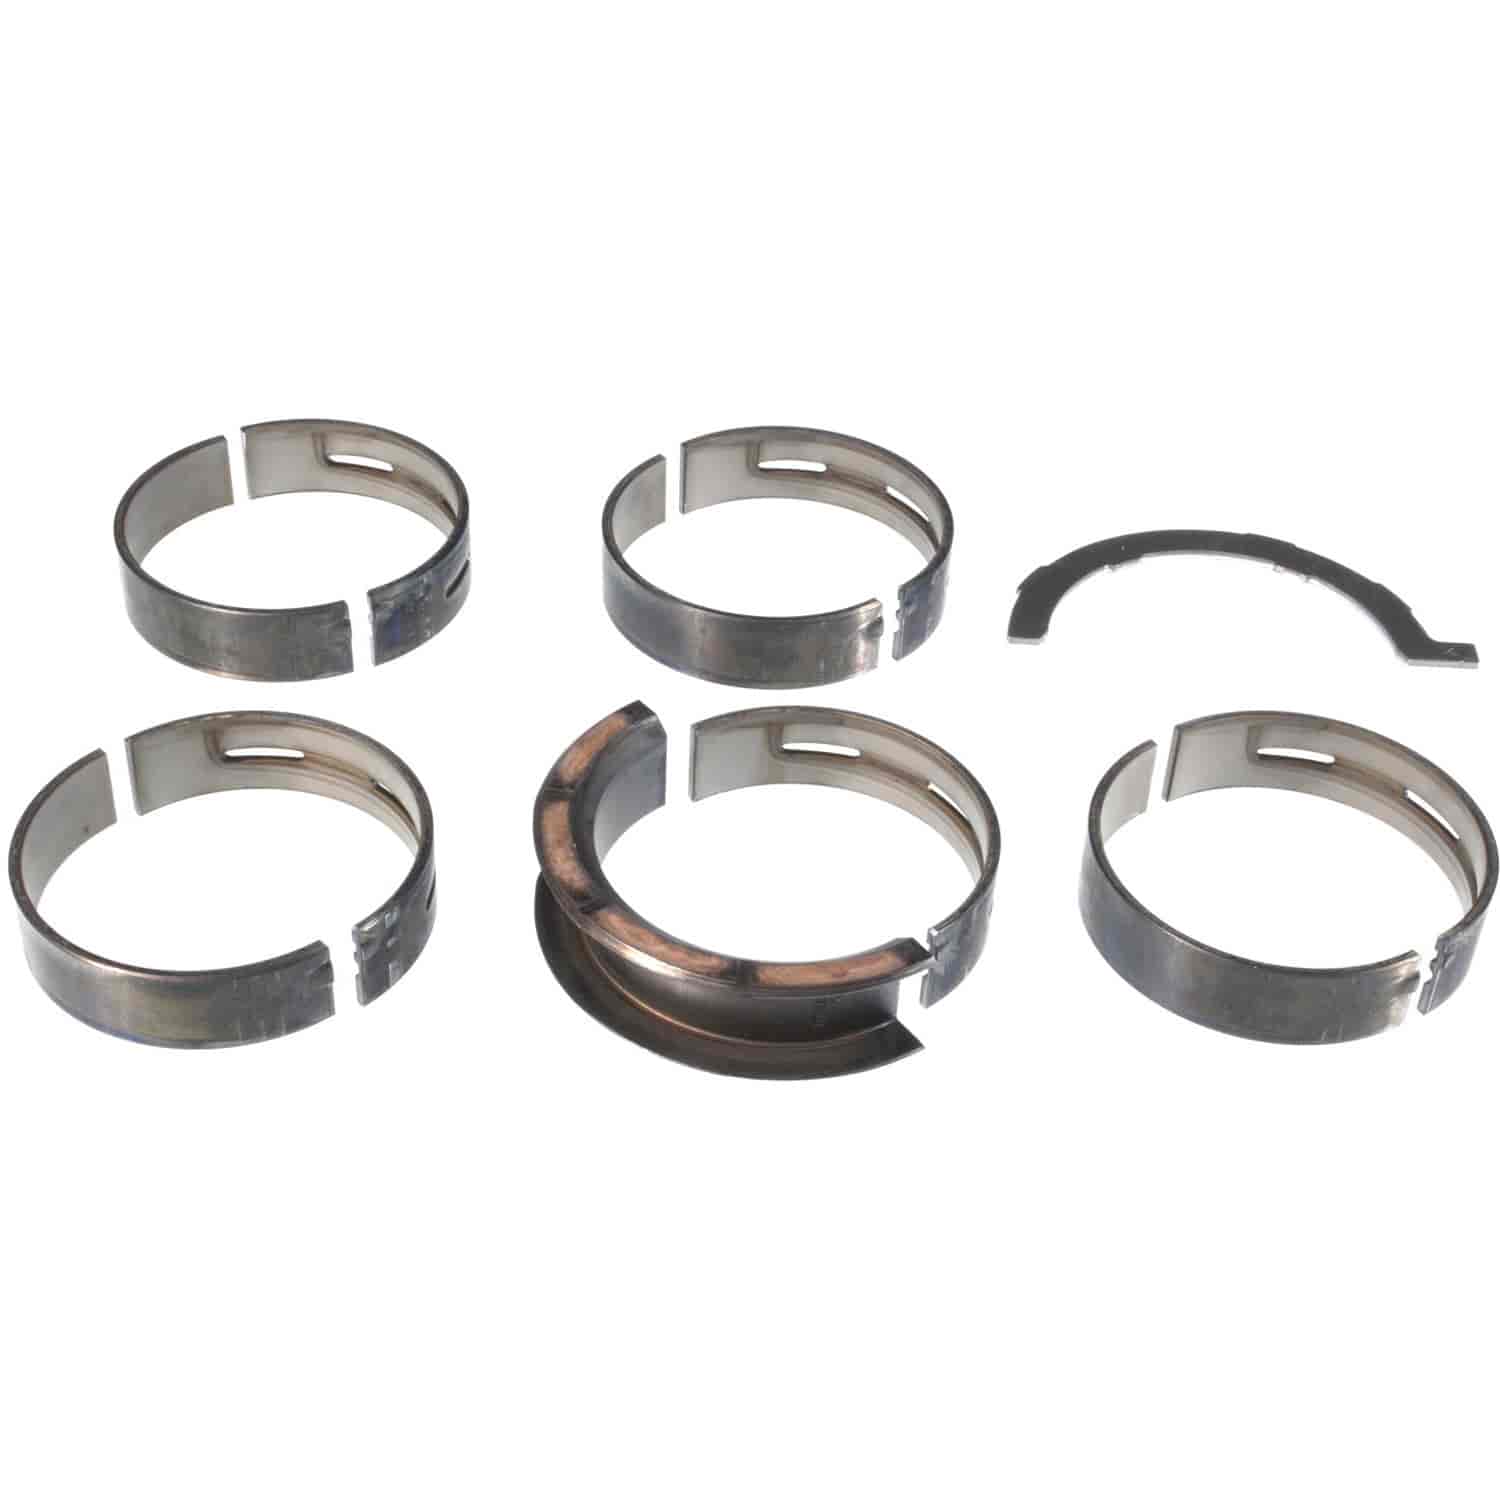 Main Bearing Set Ford 2011-2014  V8 Coyote 5.0L with Standard Size